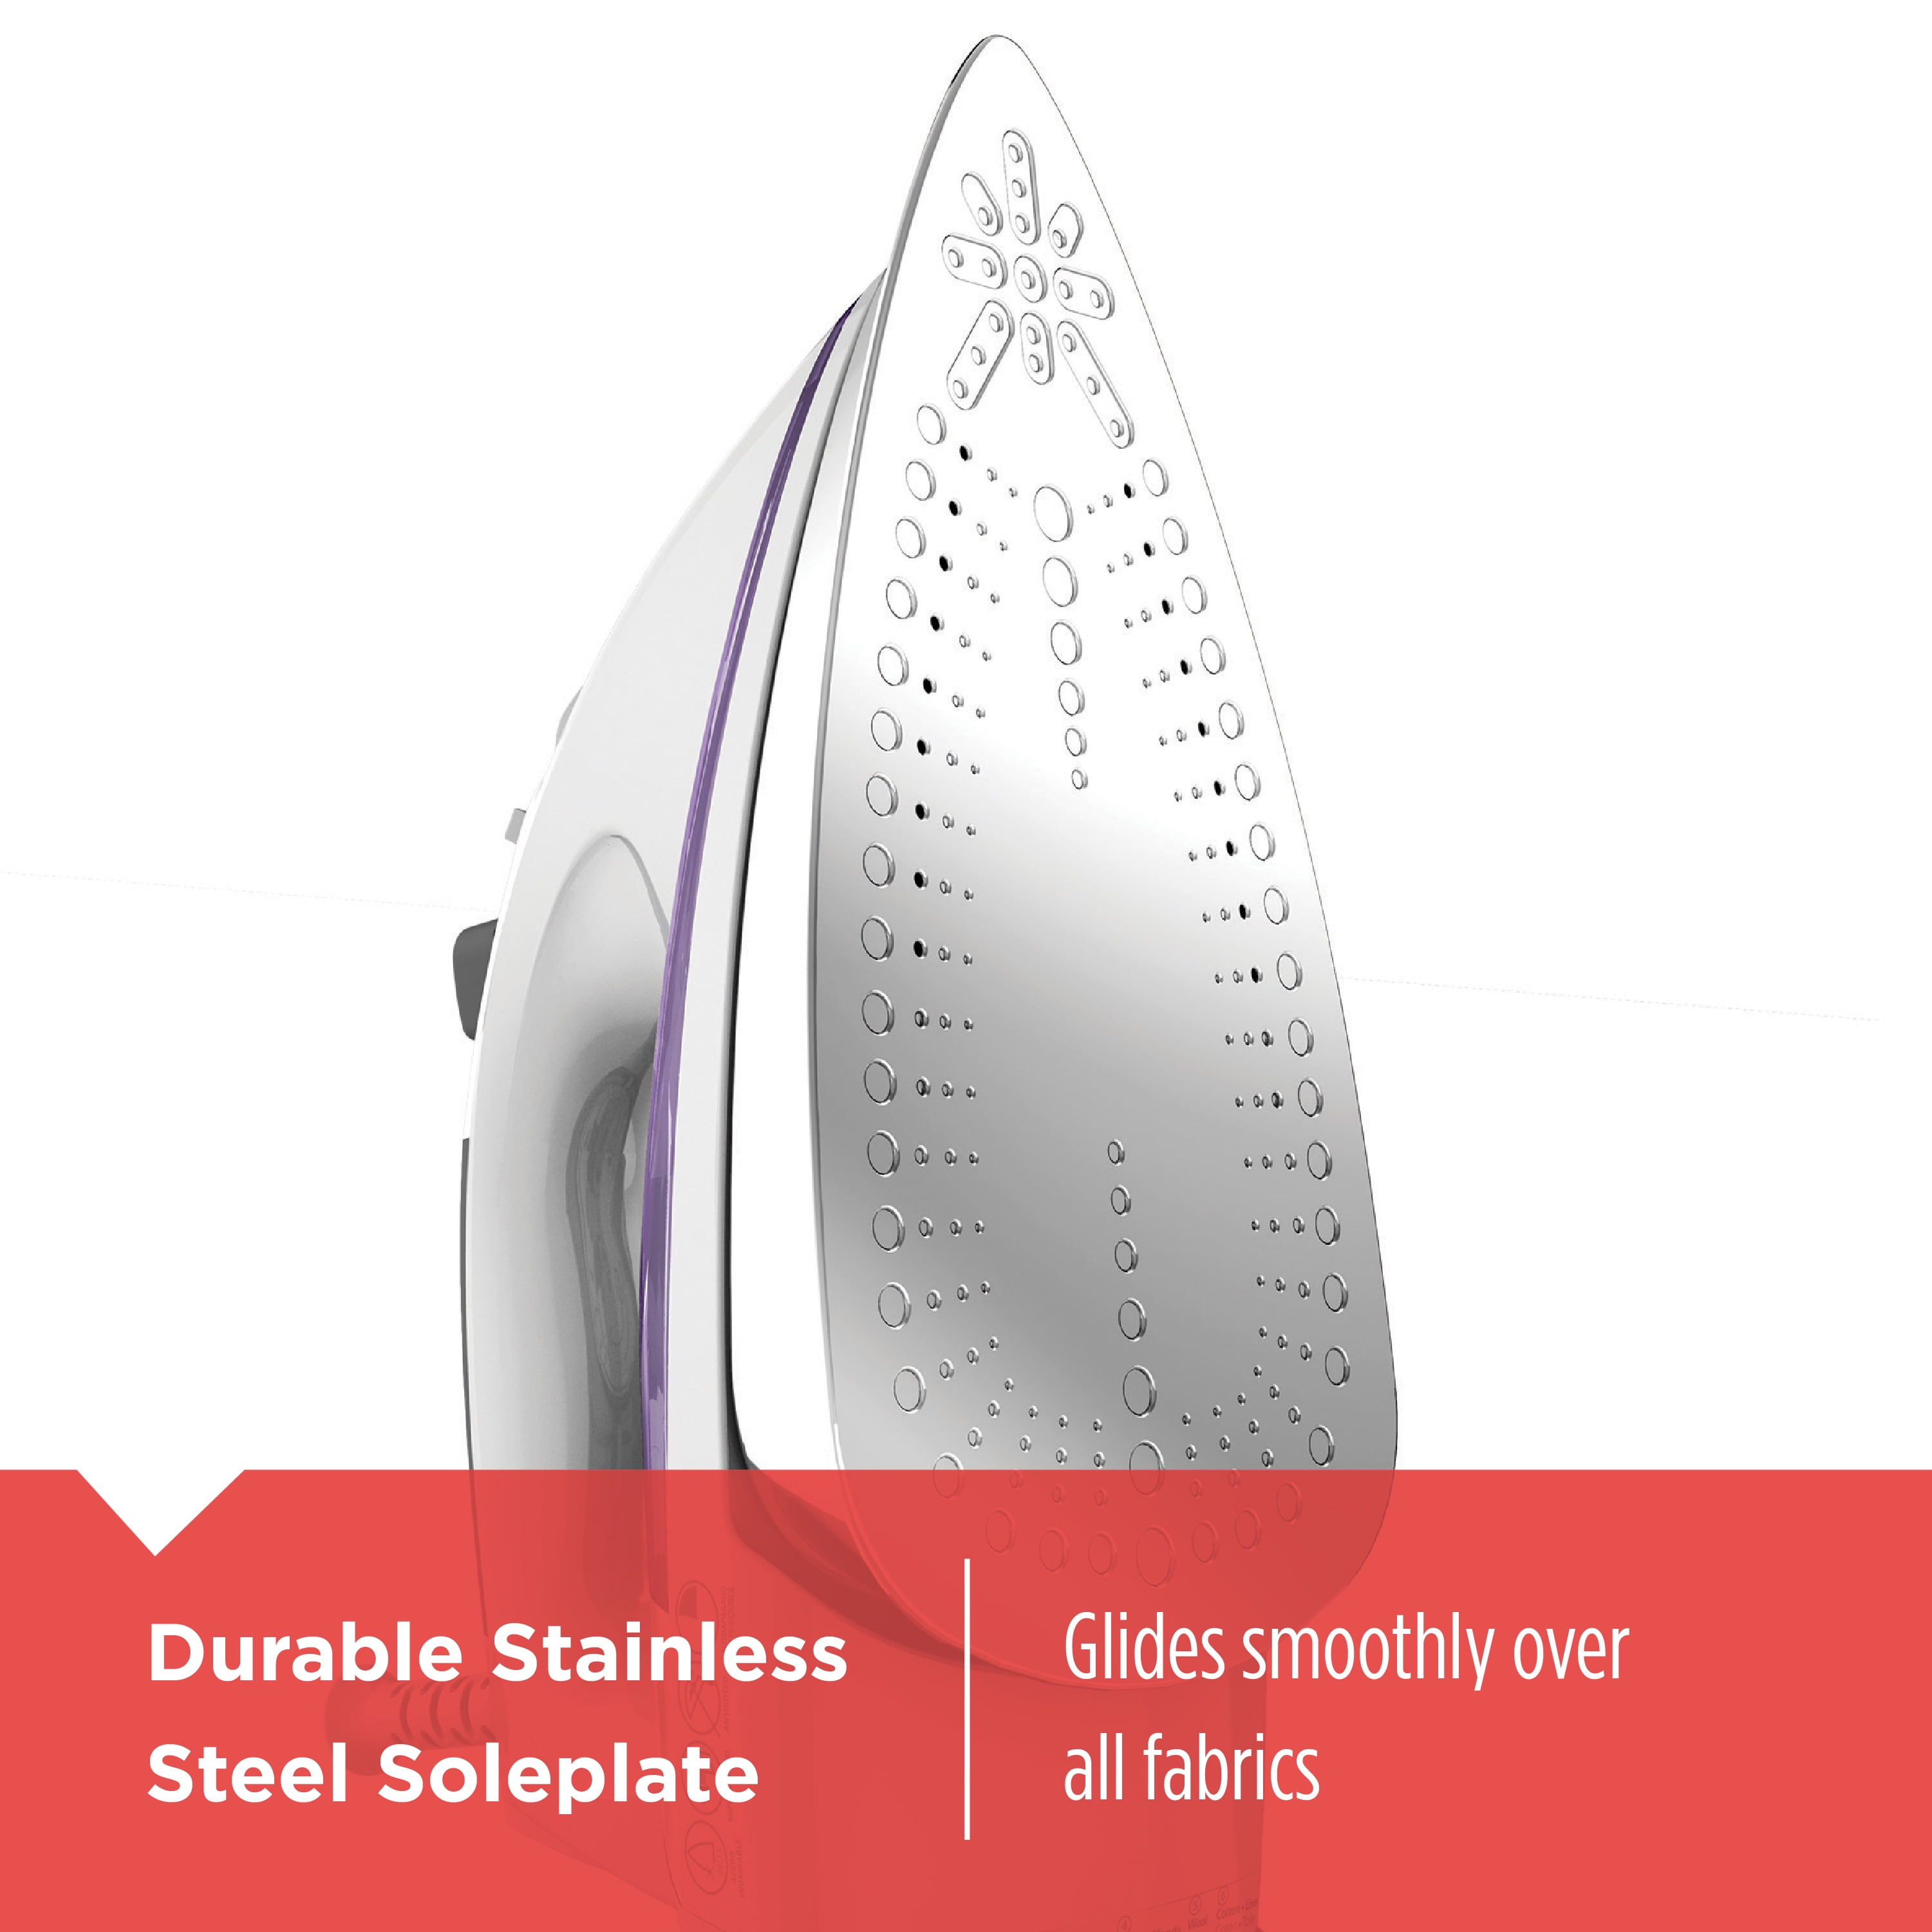 Professional Steam Iron with Stainless Steel Soleplate, Purple